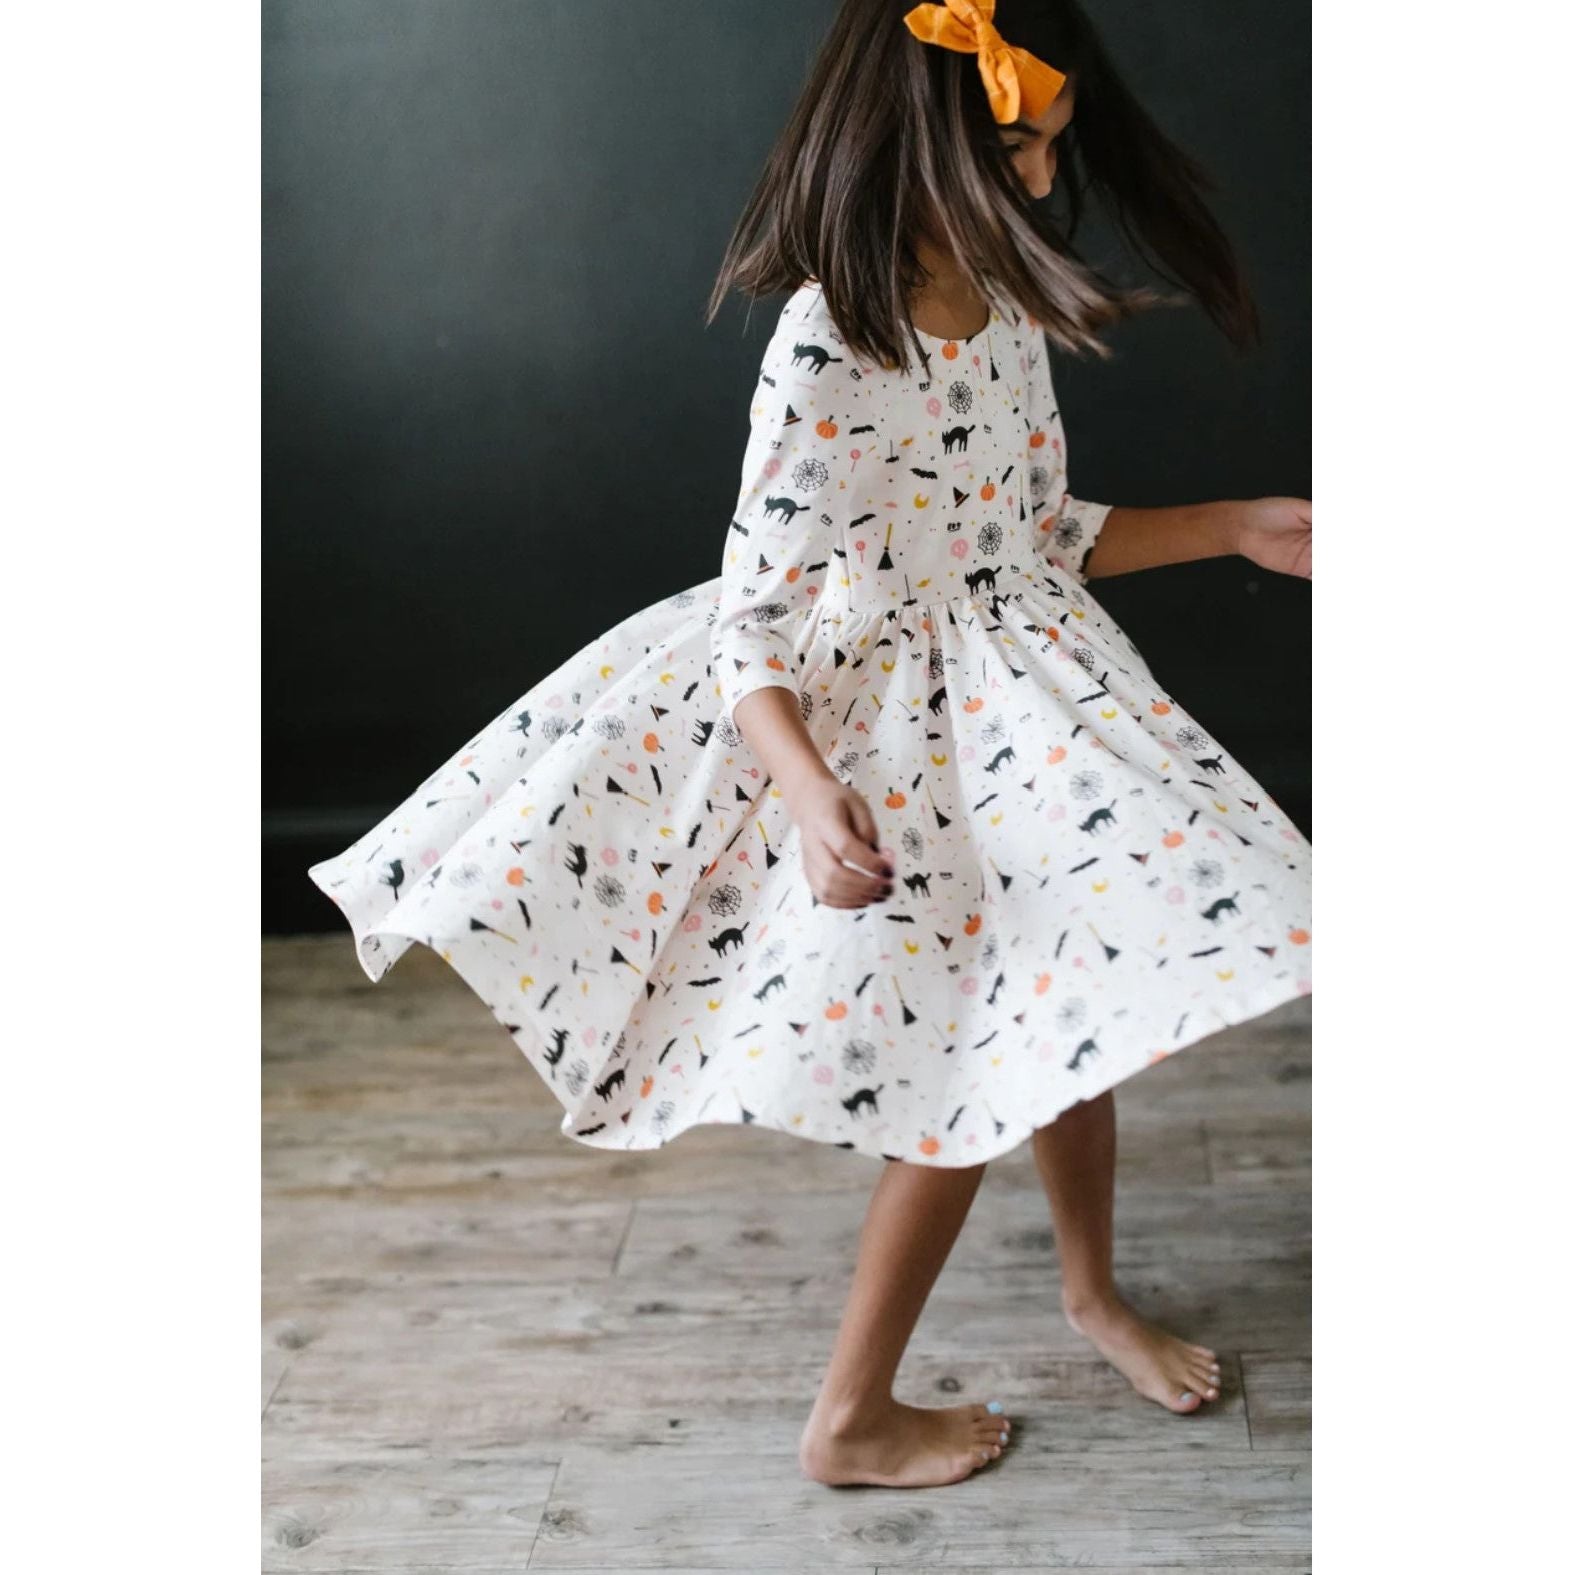 girl twirling in 3/4 length sleeve white dress with spooky scenes print